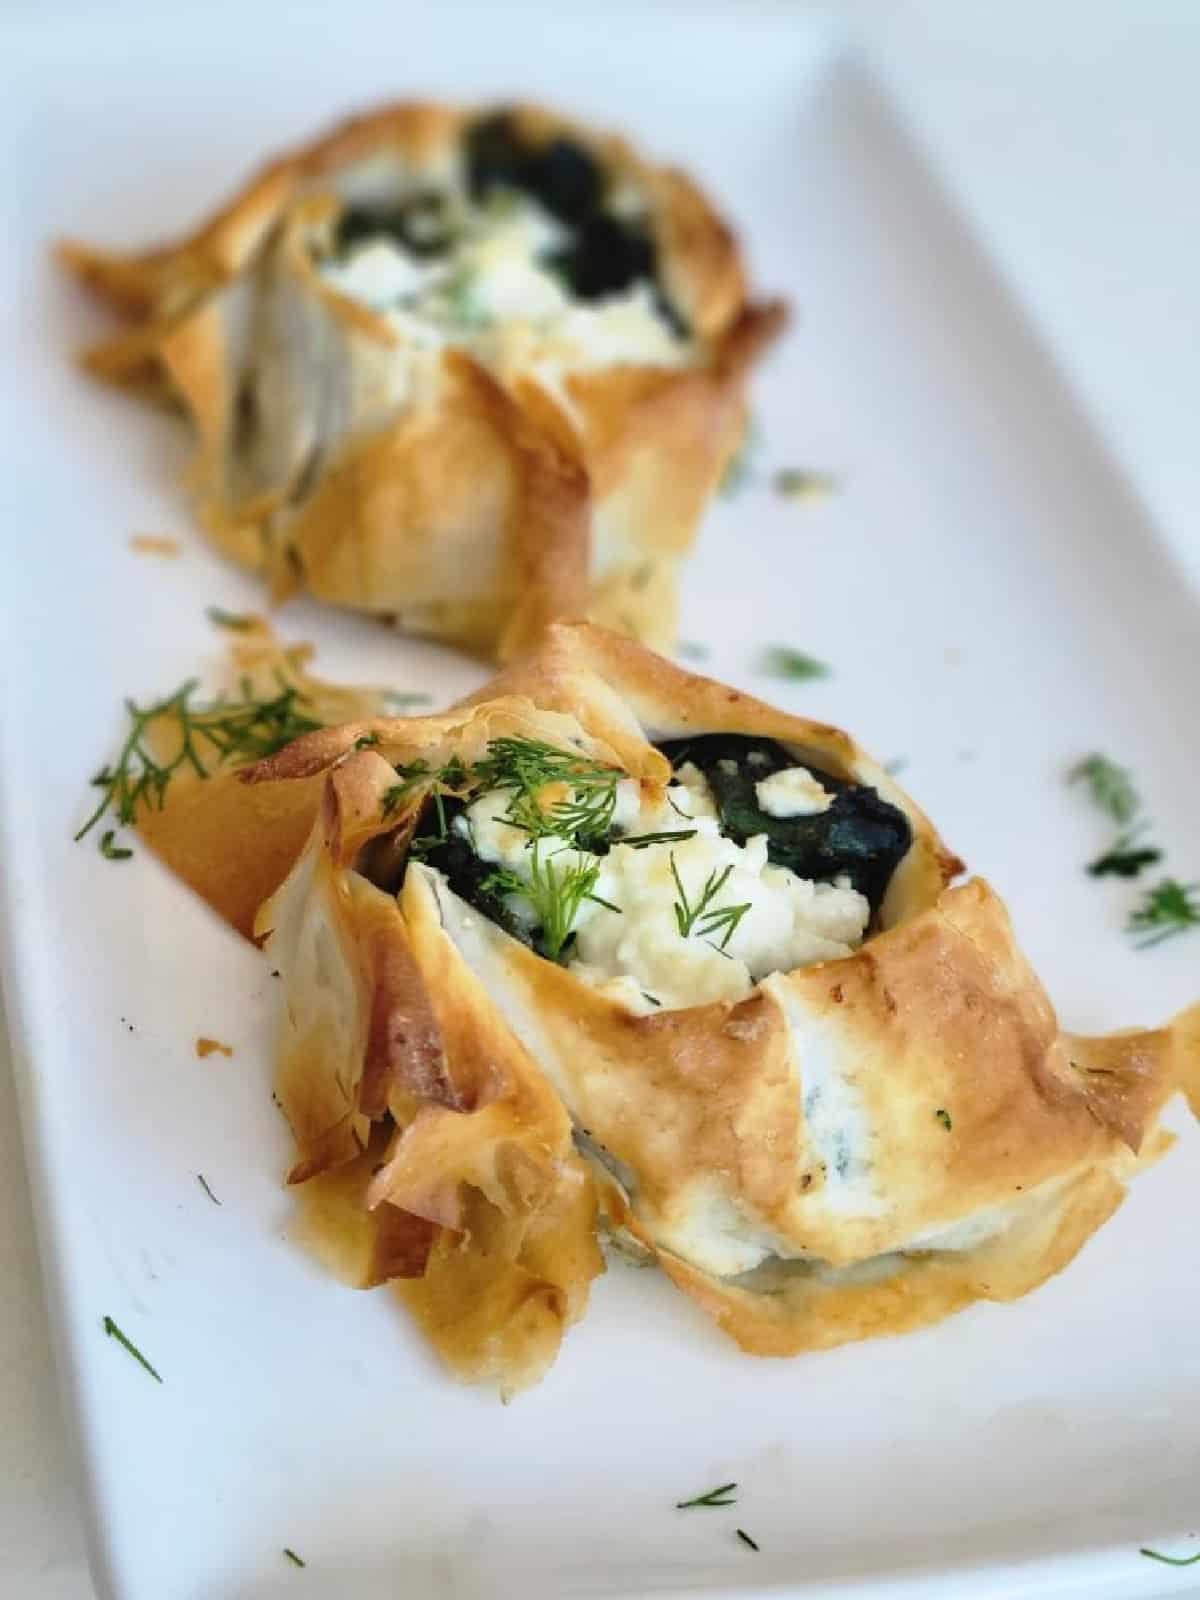 Spanakopita sprinkled with dill on a white plate.